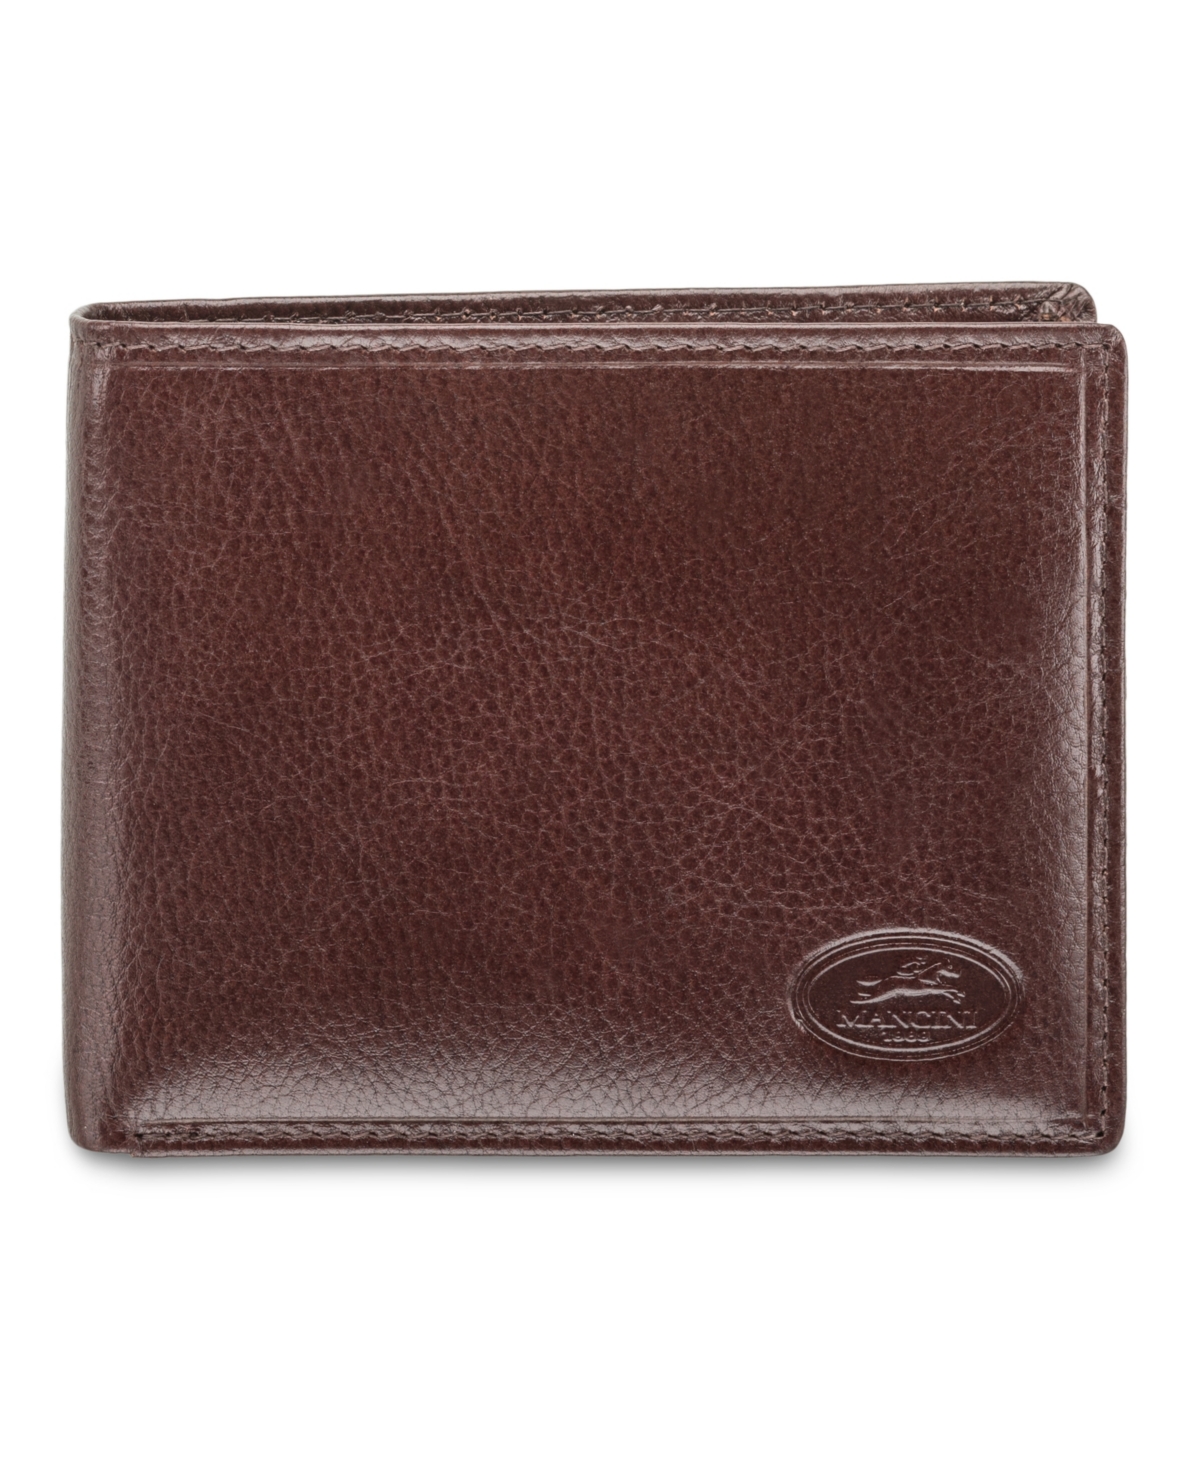 Men's Mancini Equestrian2 Collection Rfid Secure Billfold with Removable Left Wing Passcase and Coin Pocket - Brown